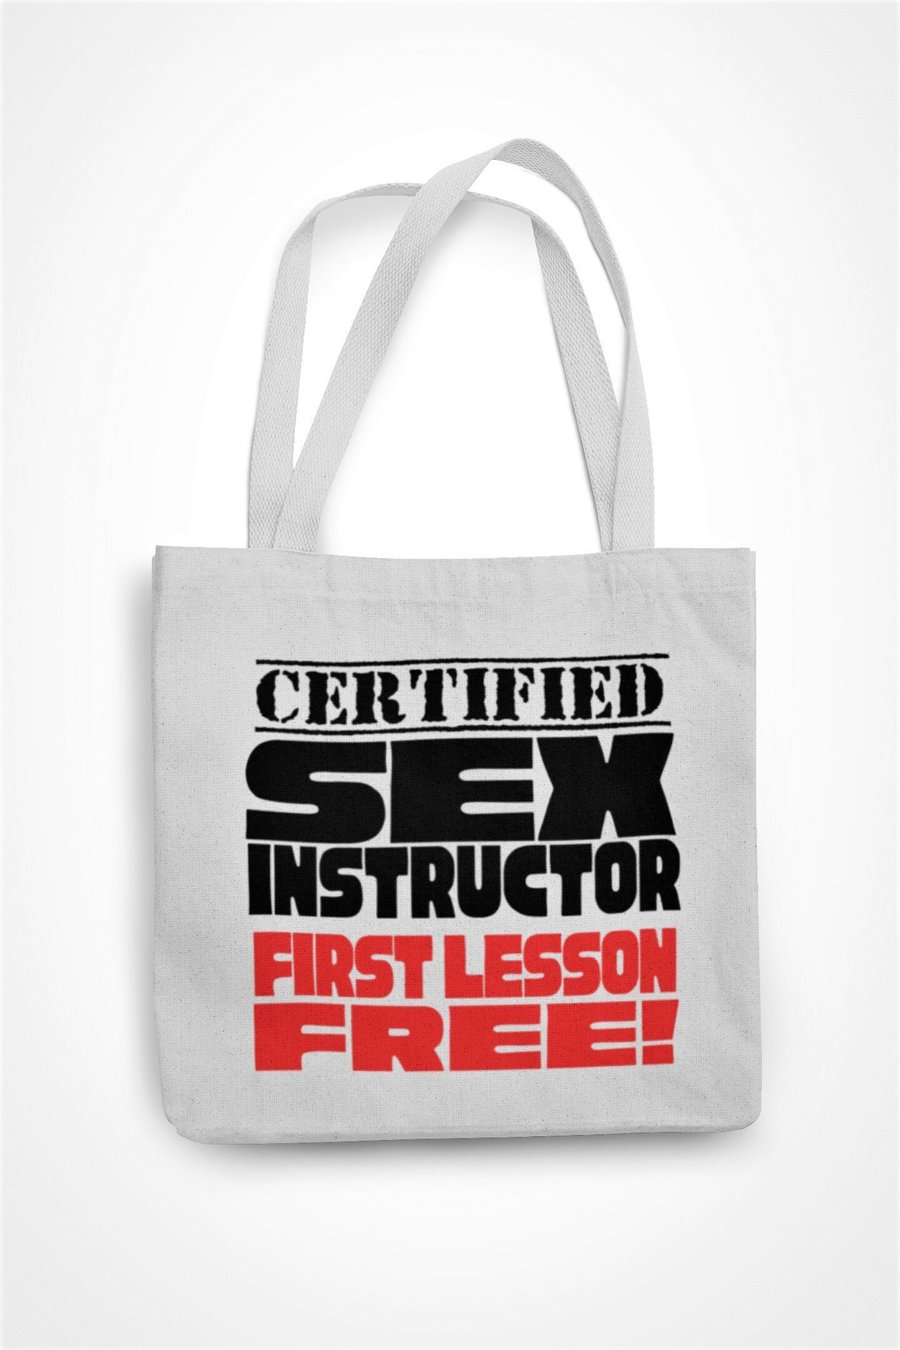 Certified Sex Instructor First Lesson Free Tote Bag Funny Rude Novelty Shopping 